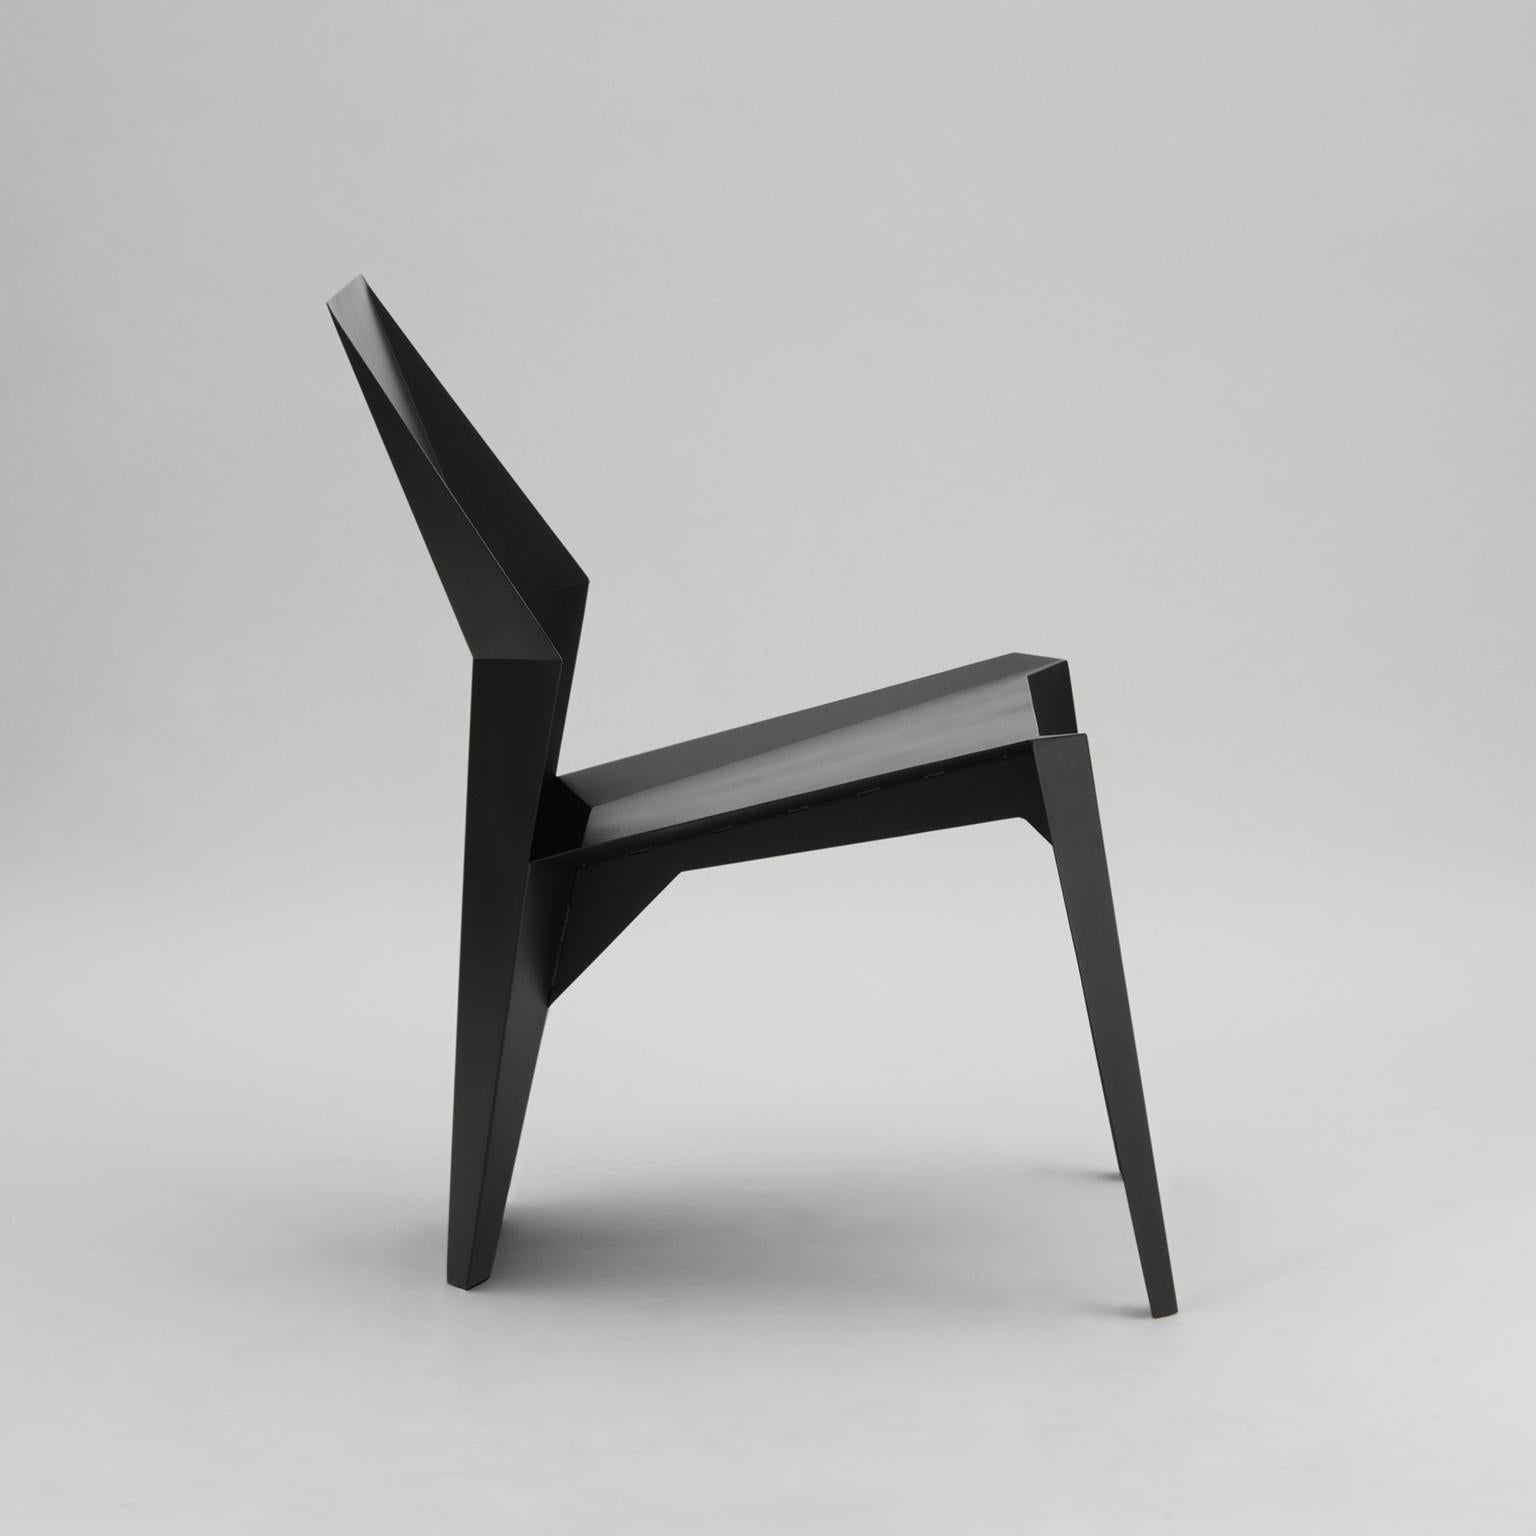 English Centaurus Sculptural Chair with soft-touch powder coated finish